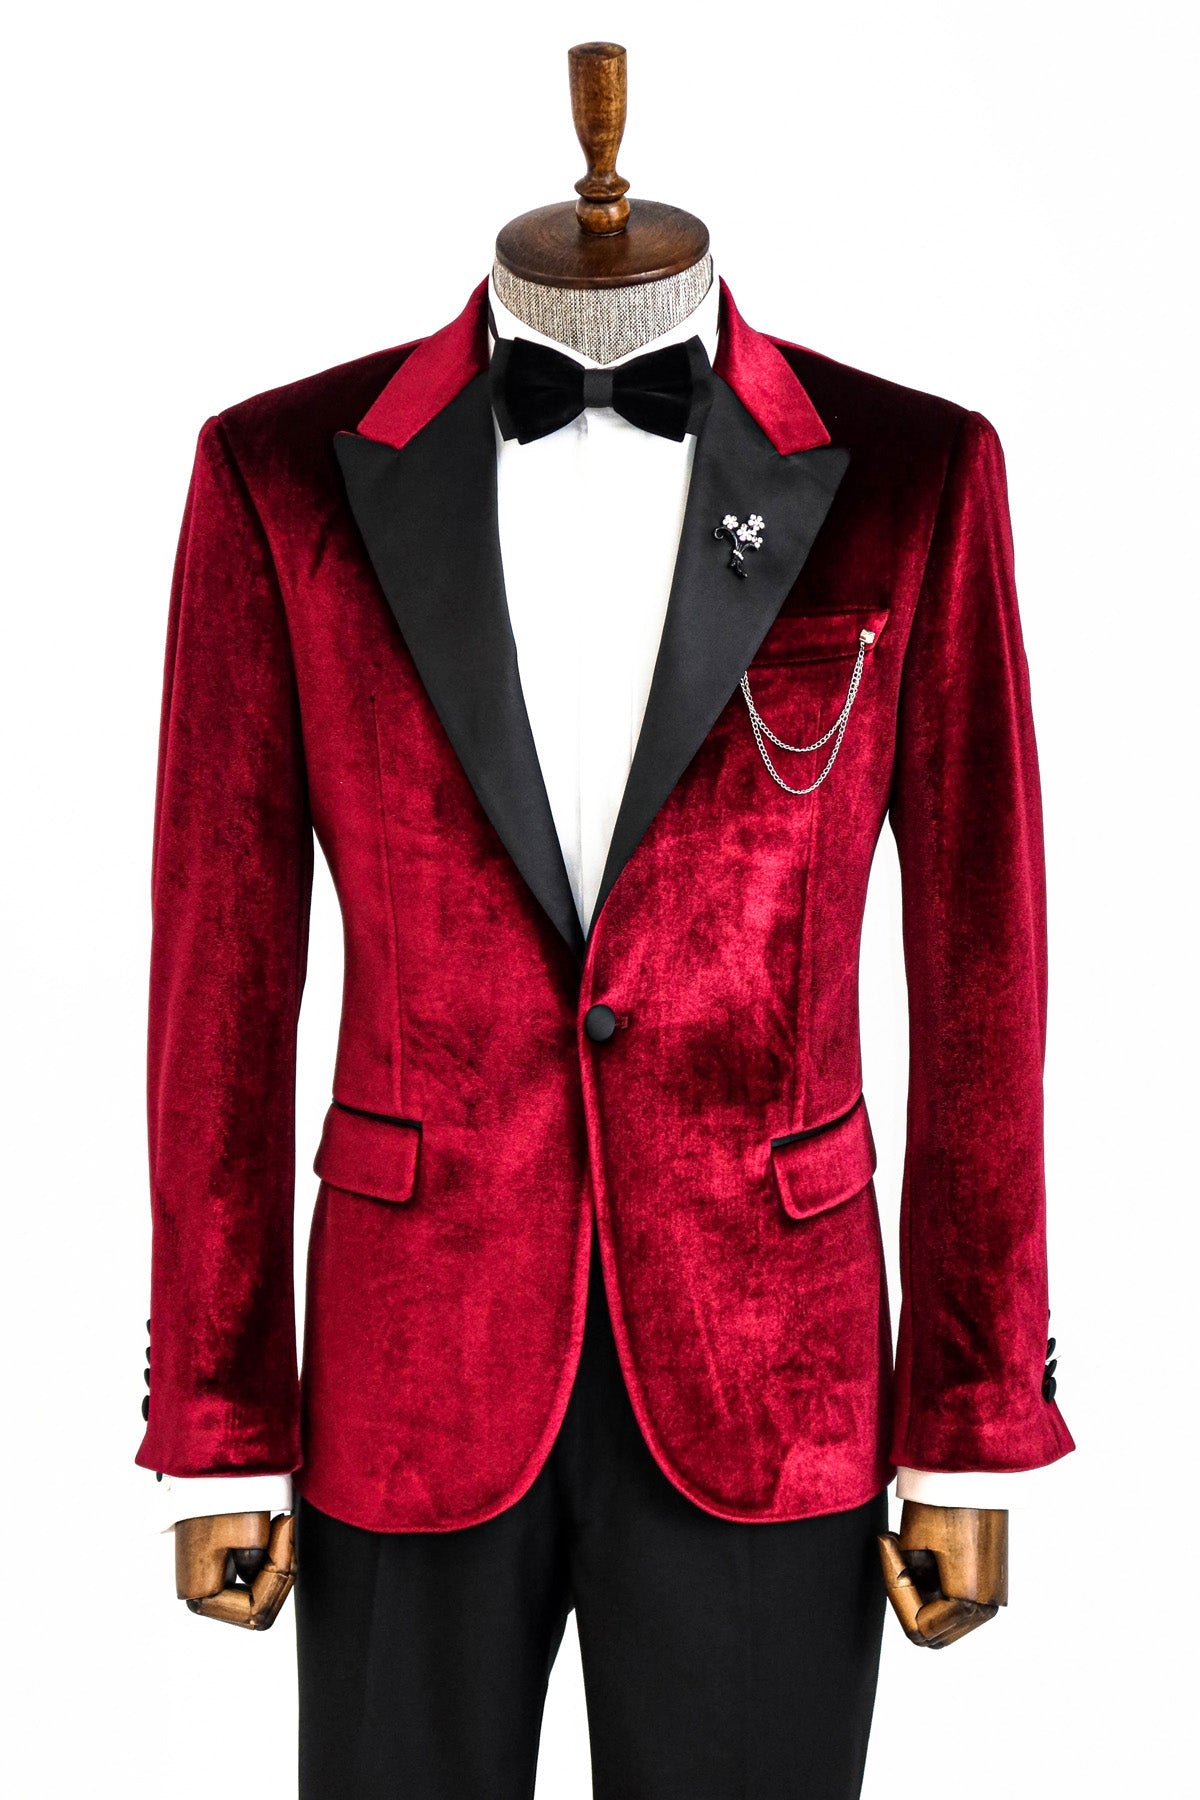 Burgundy Velvet Jacket - Perfect for Prom, Weddings and Formal Events